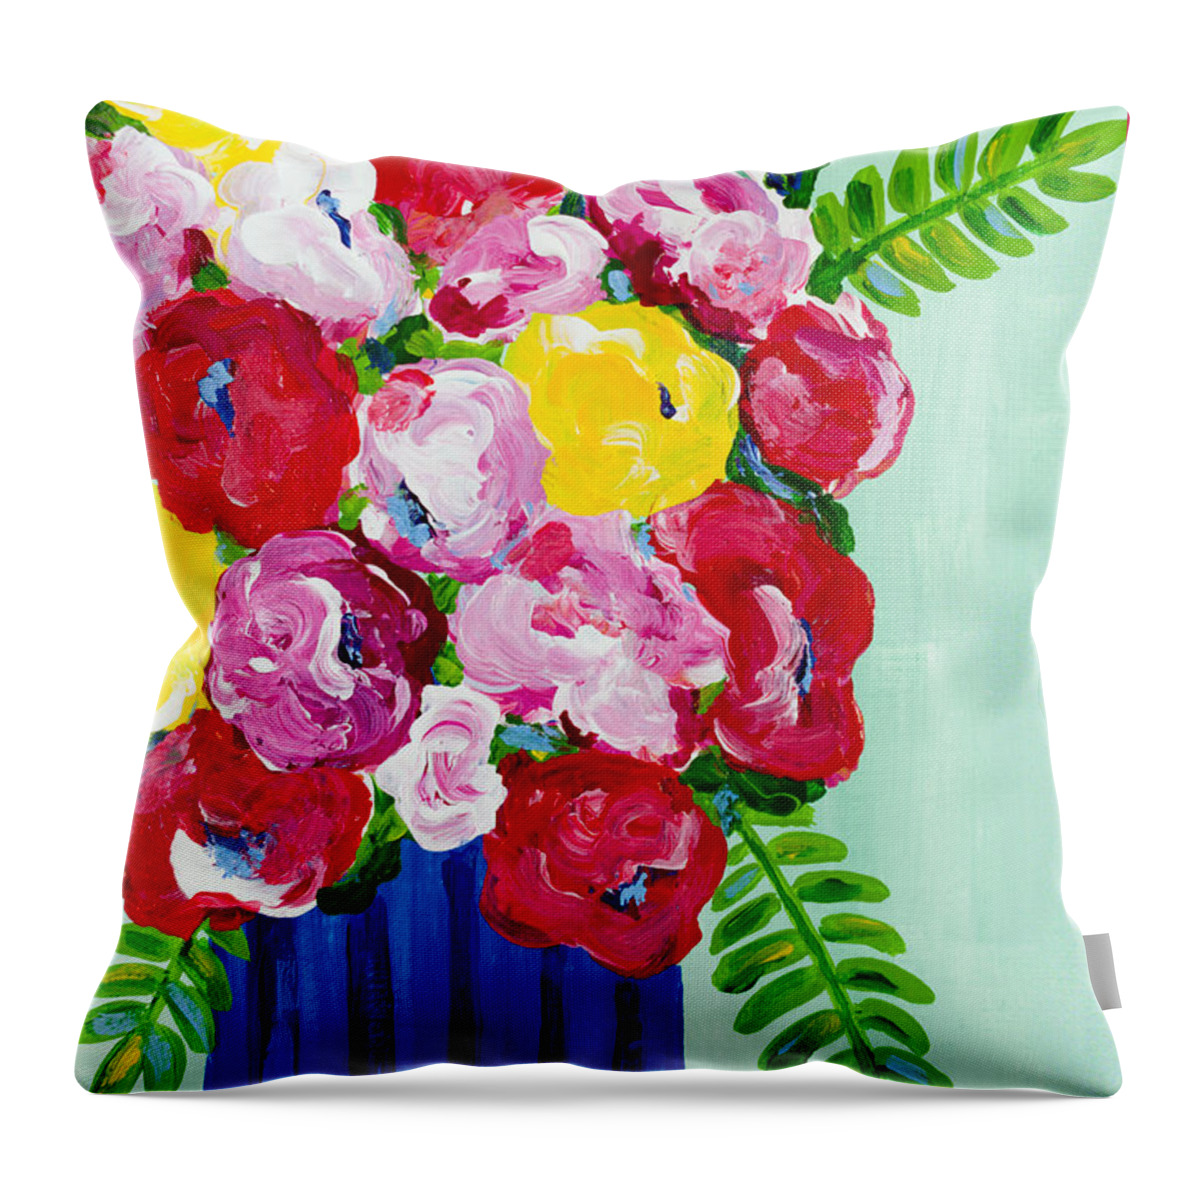 Abstract Floral Throw Pillow featuring the painting Lemon Lime by Beth Ann Scott